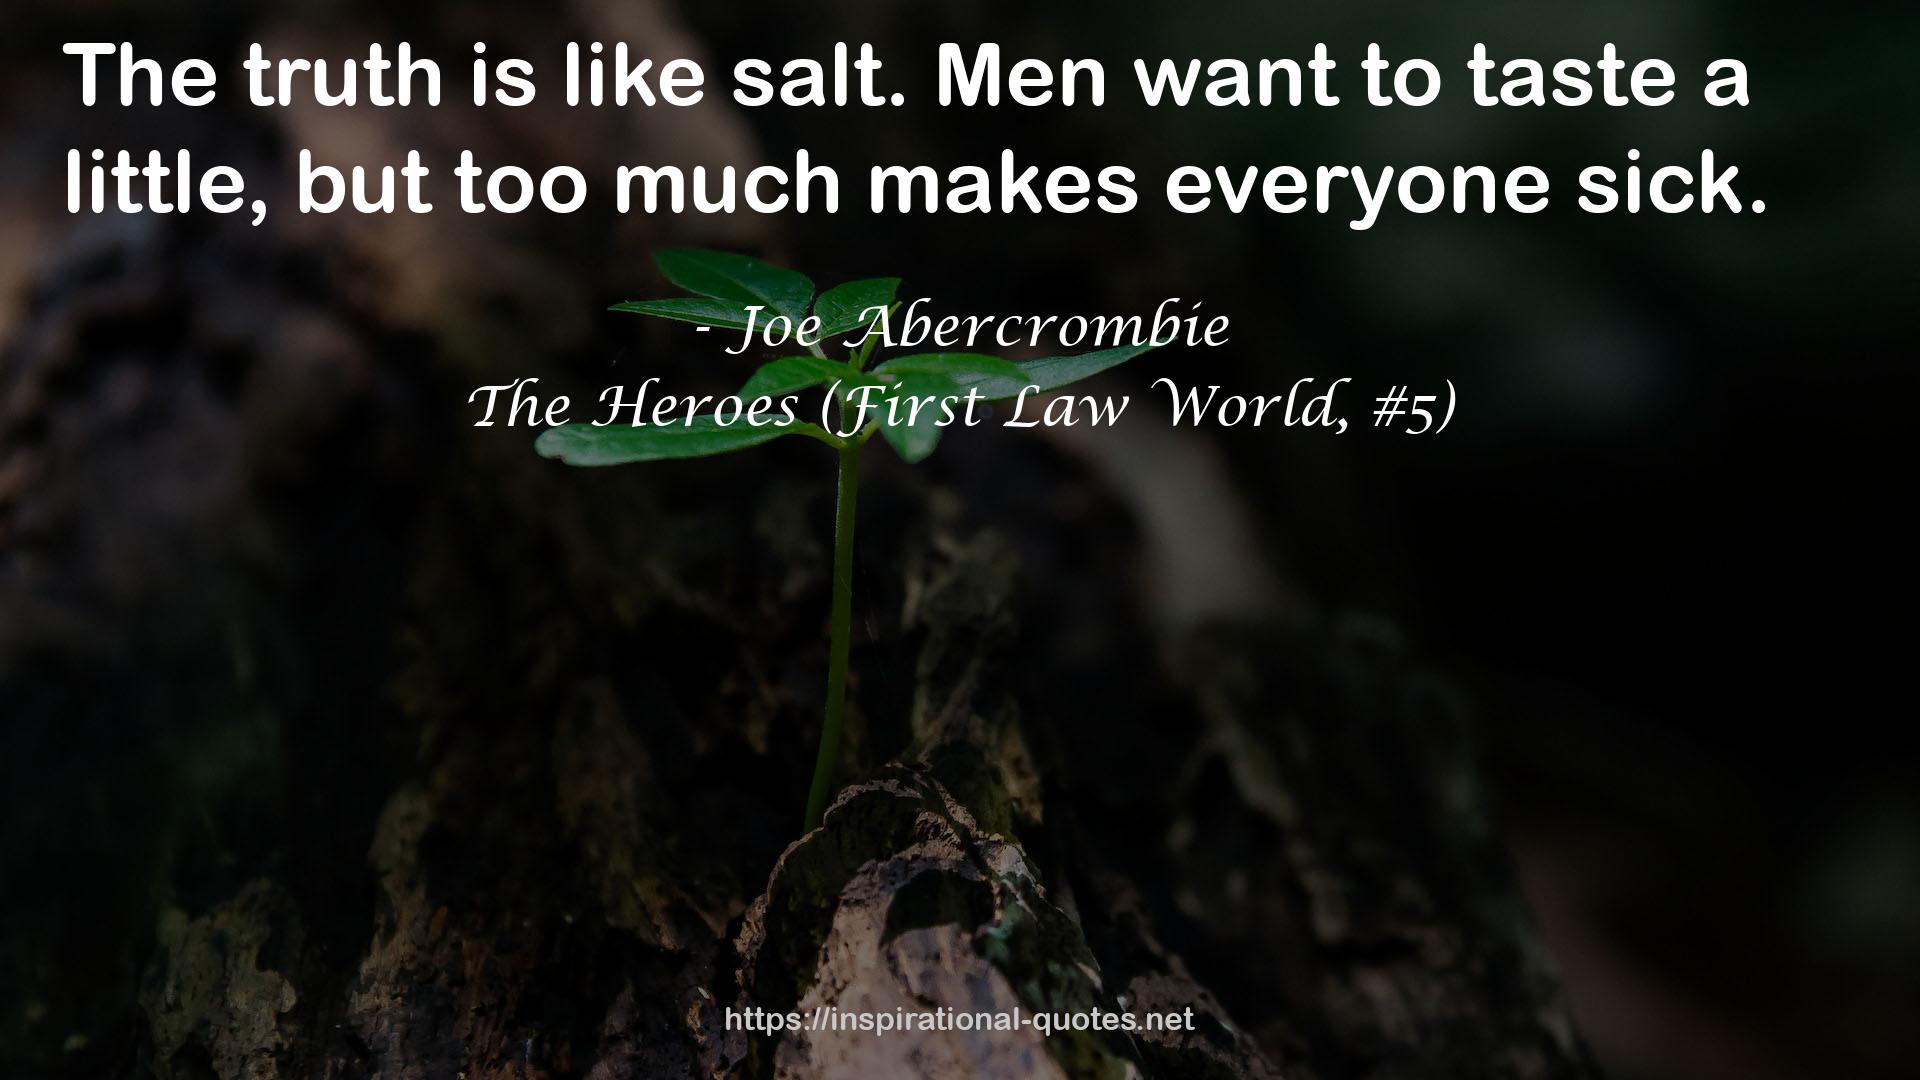 The Heroes (First Law World, #5) QUOTES